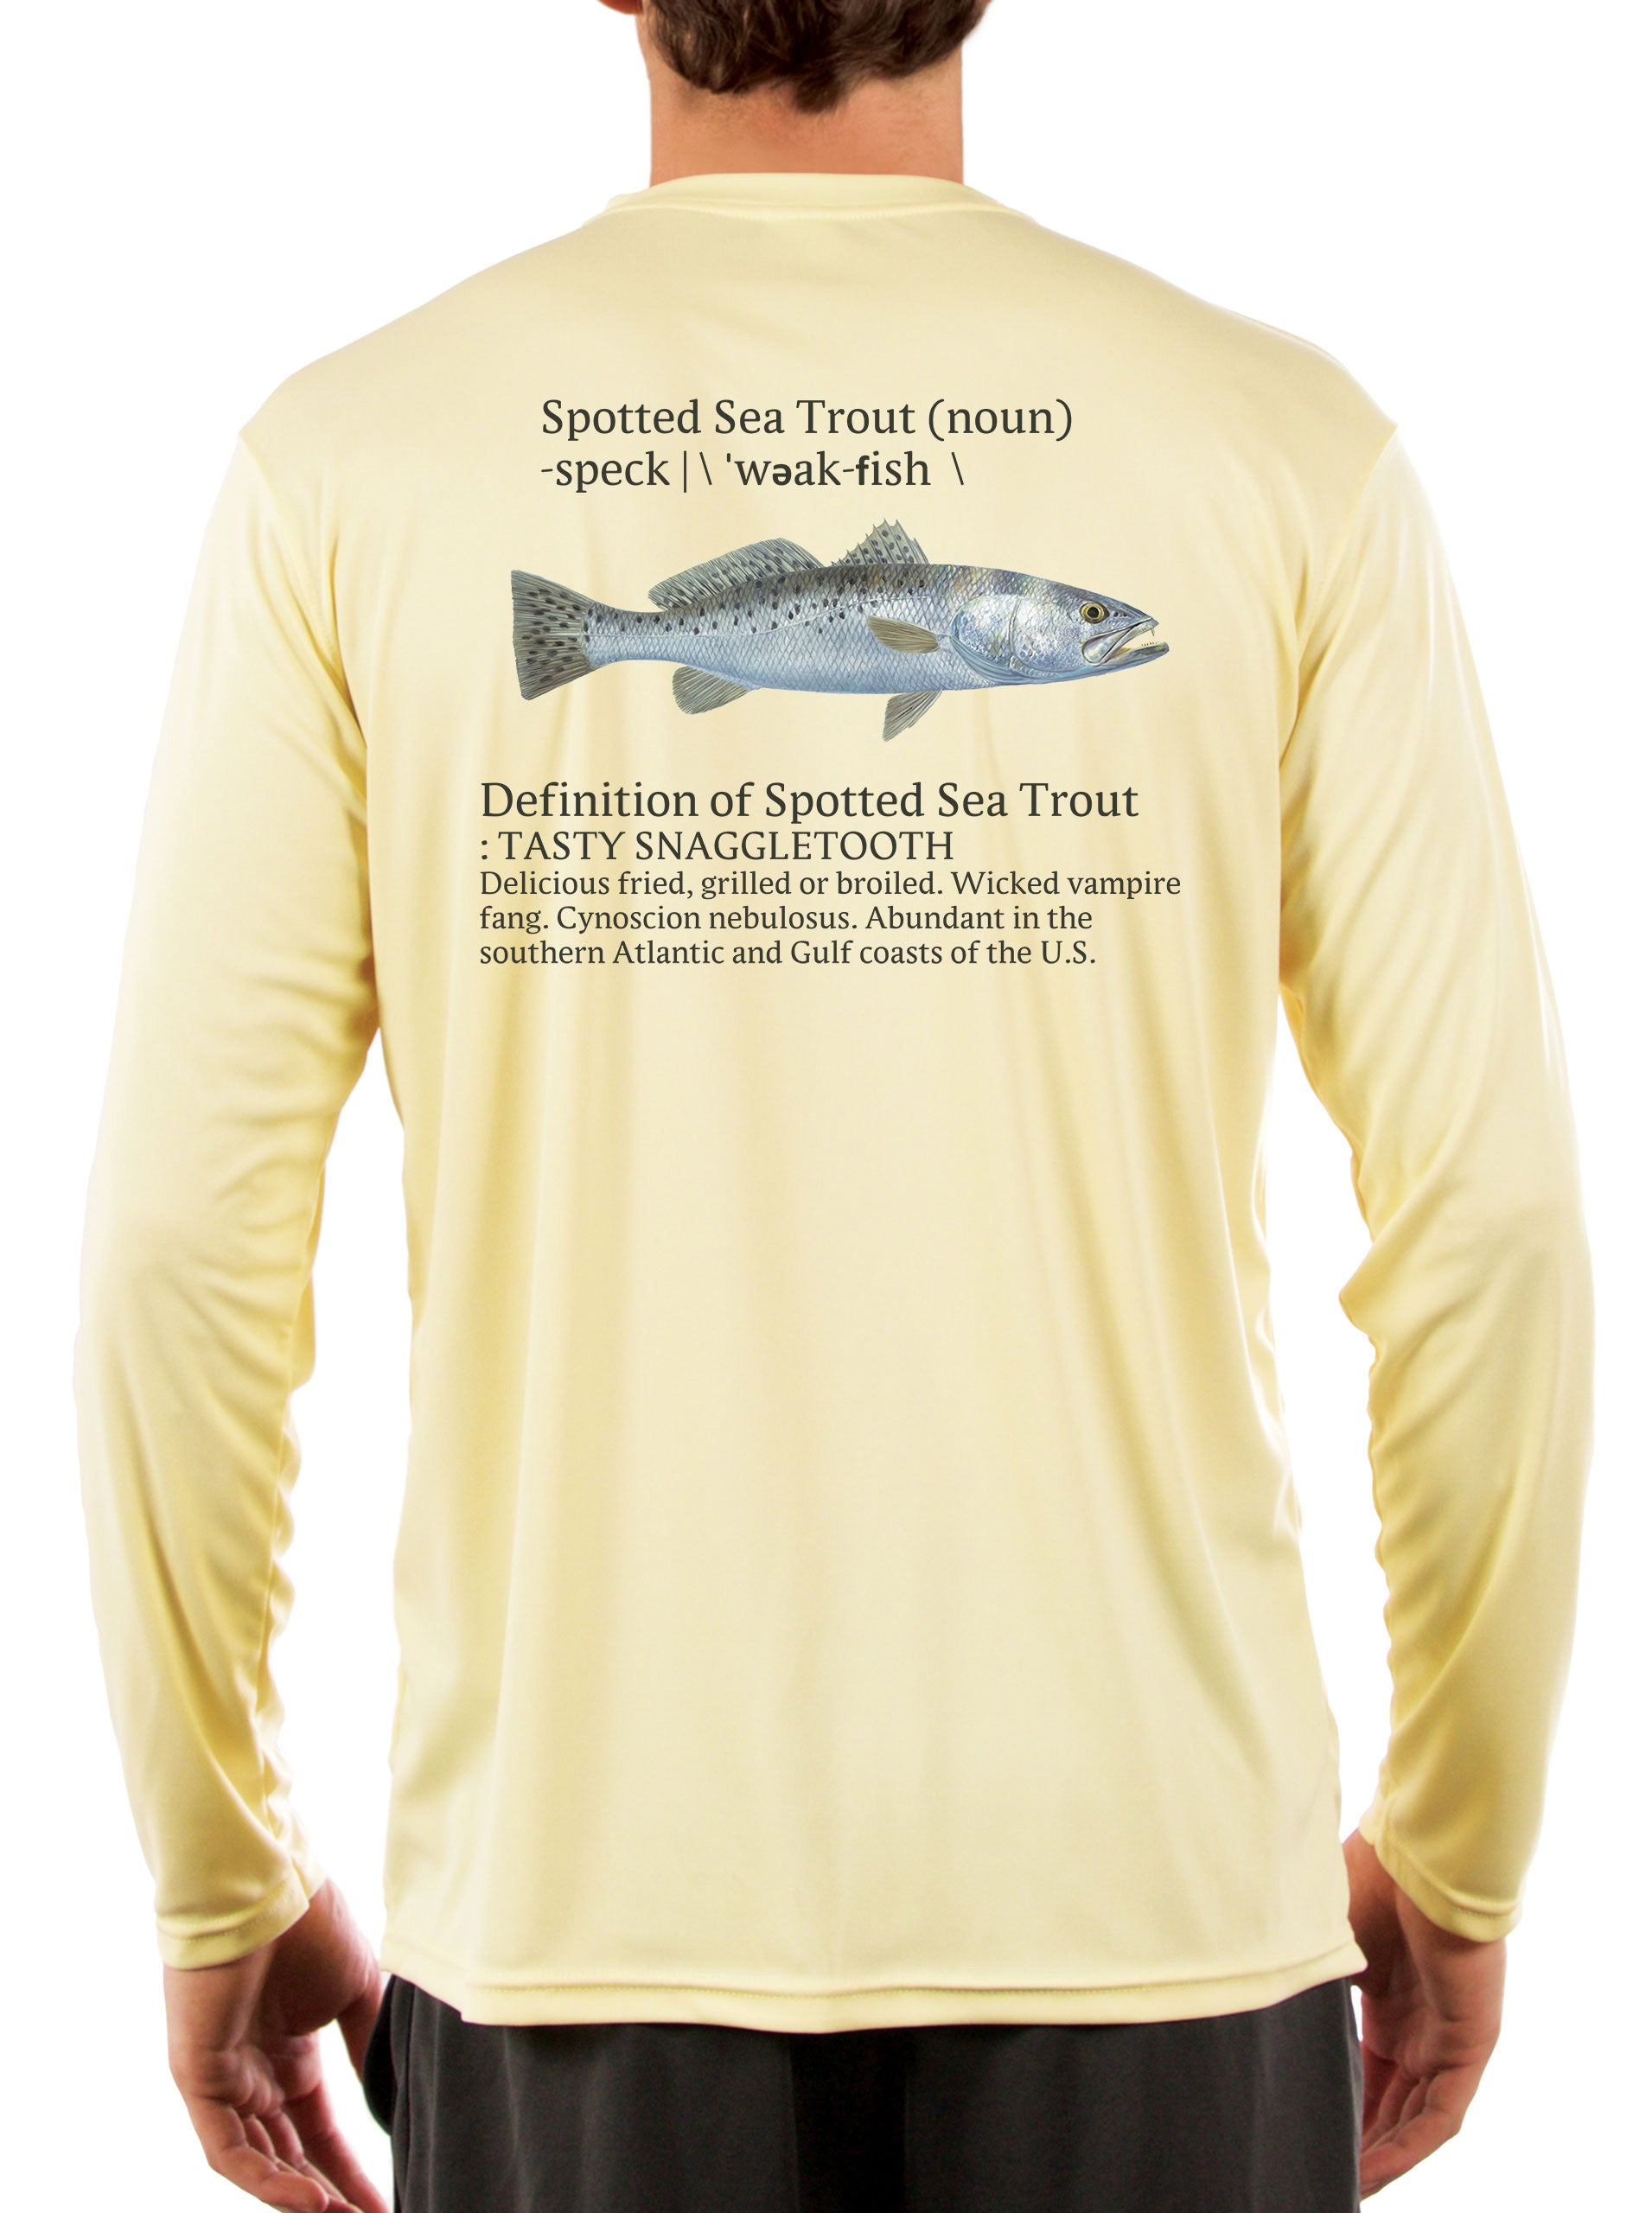 Speckled Trout Fishing Shirts for Men Skiff Inshore - UV Protected +50 Sun Protection with Moisture Wicking Technology 4XL / Yellow